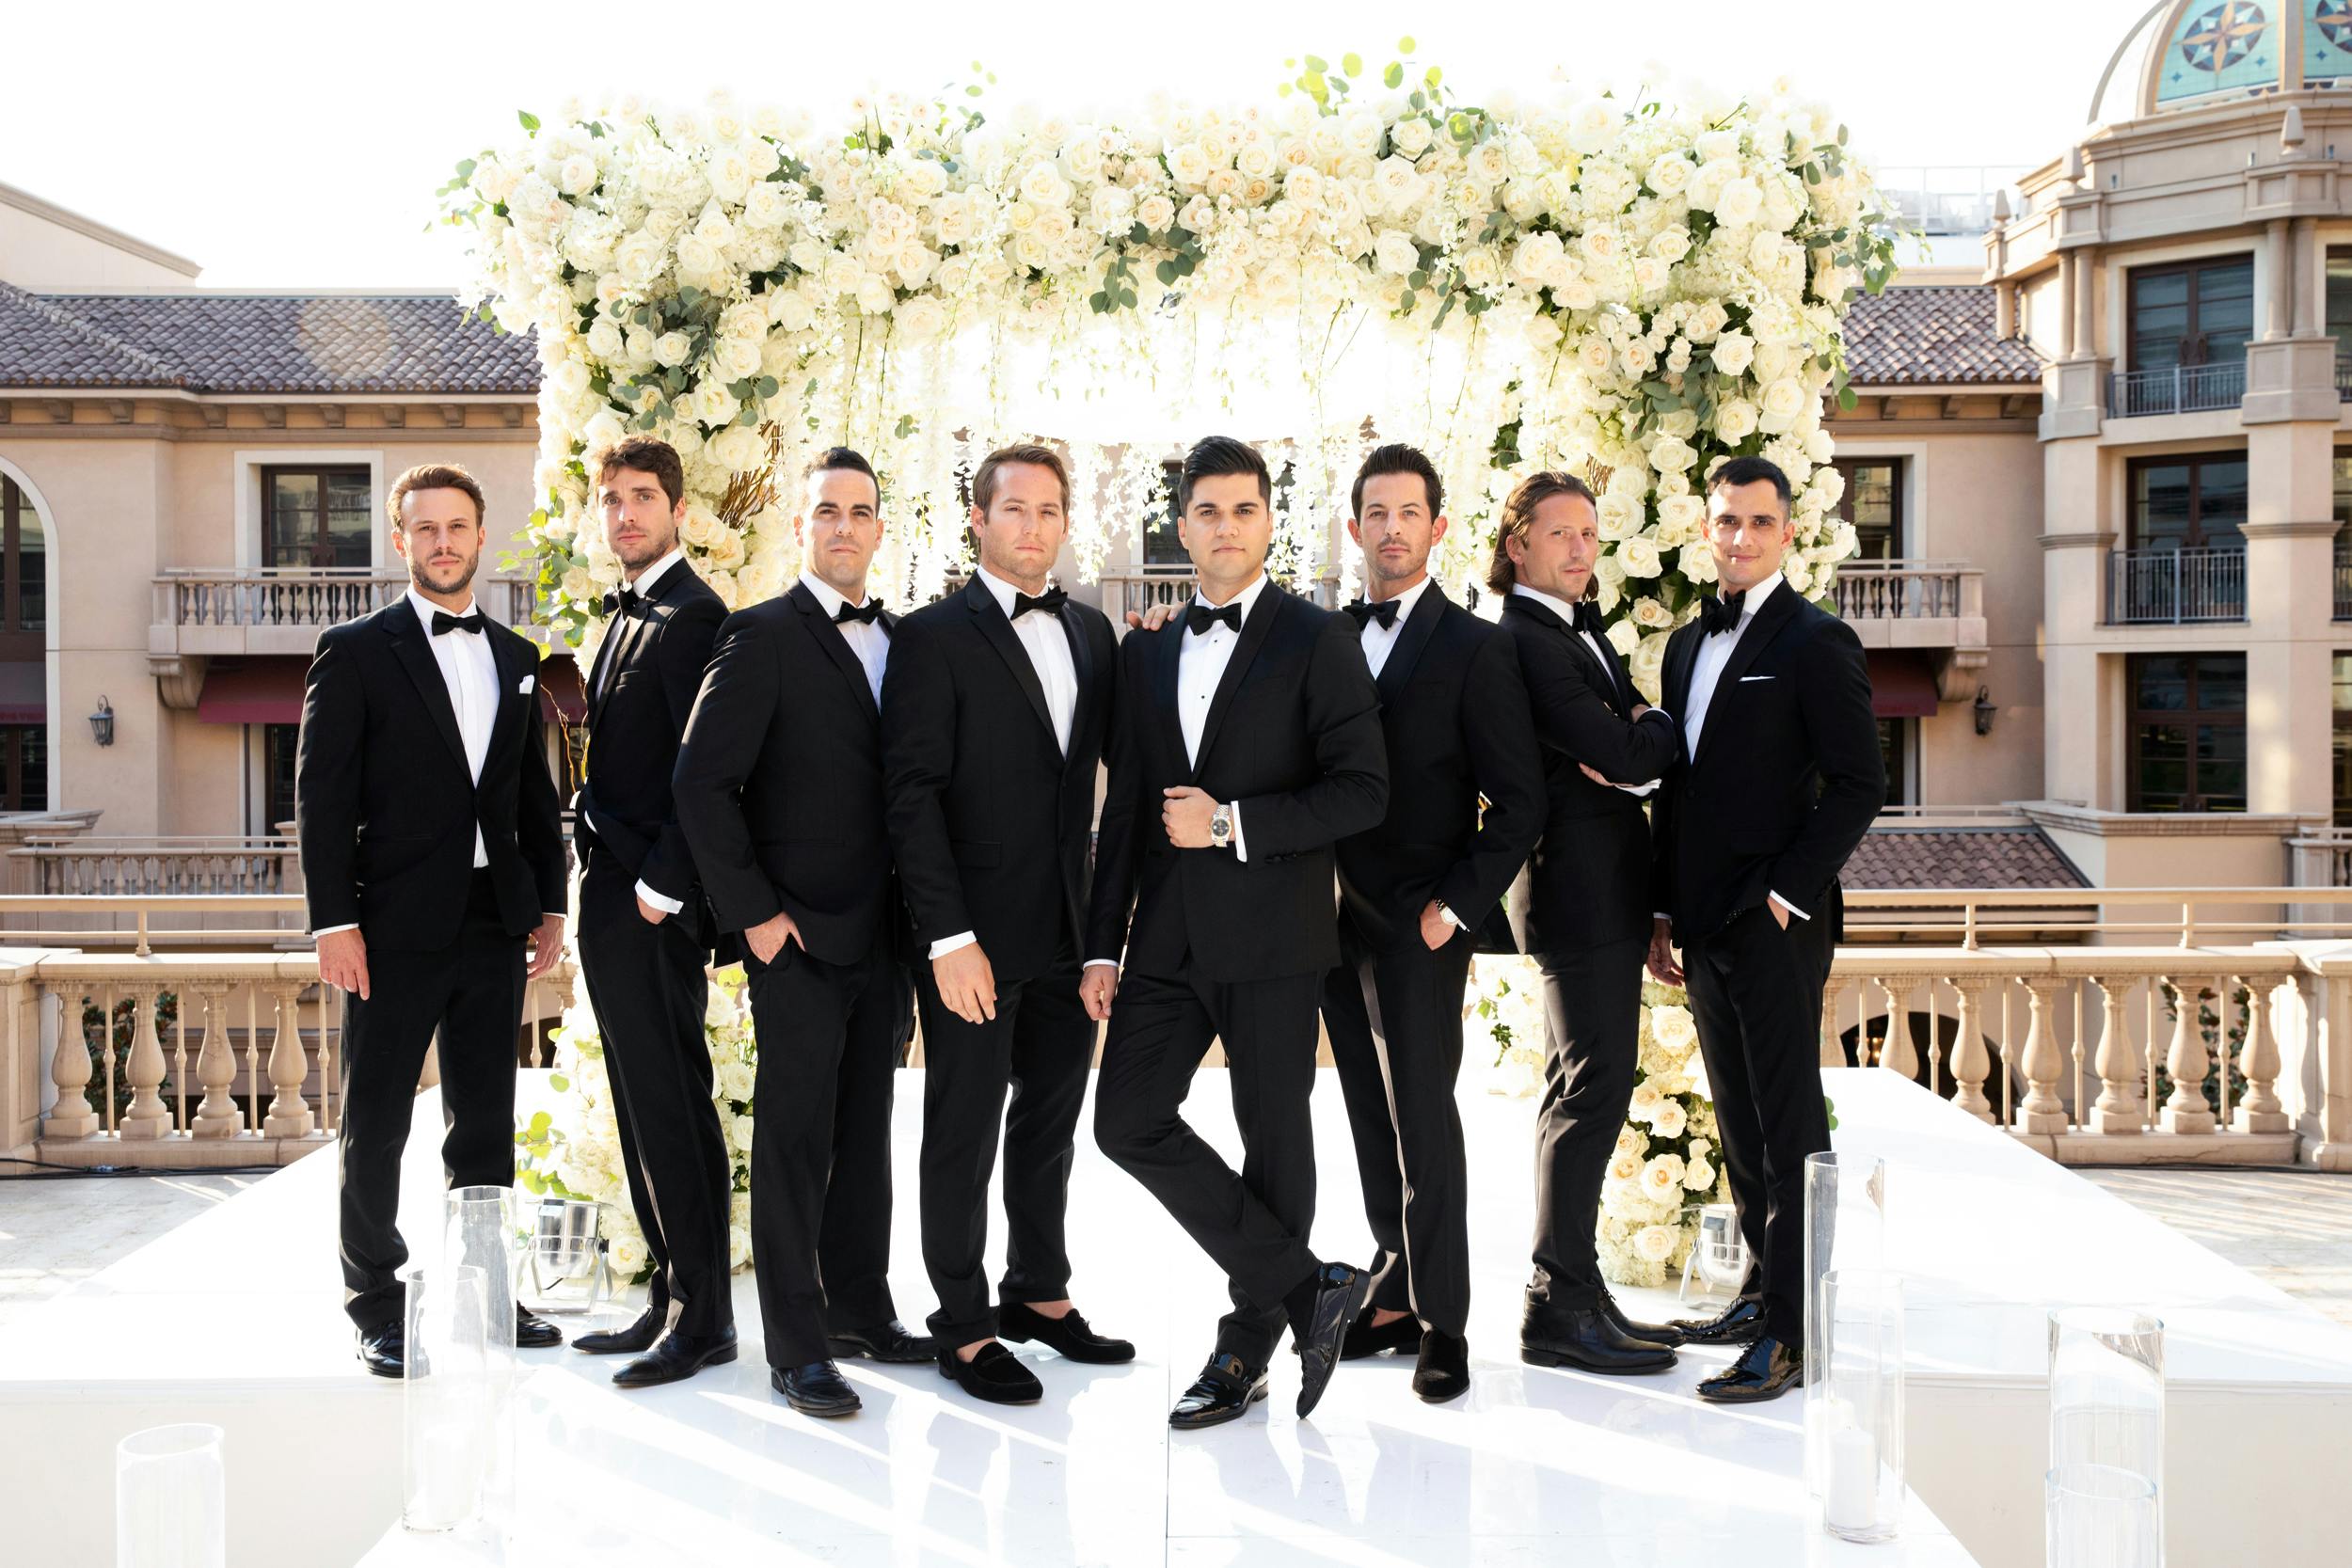 8 groomsmen in black tuxedos striking a pose in front of wedding arch | PartySlate